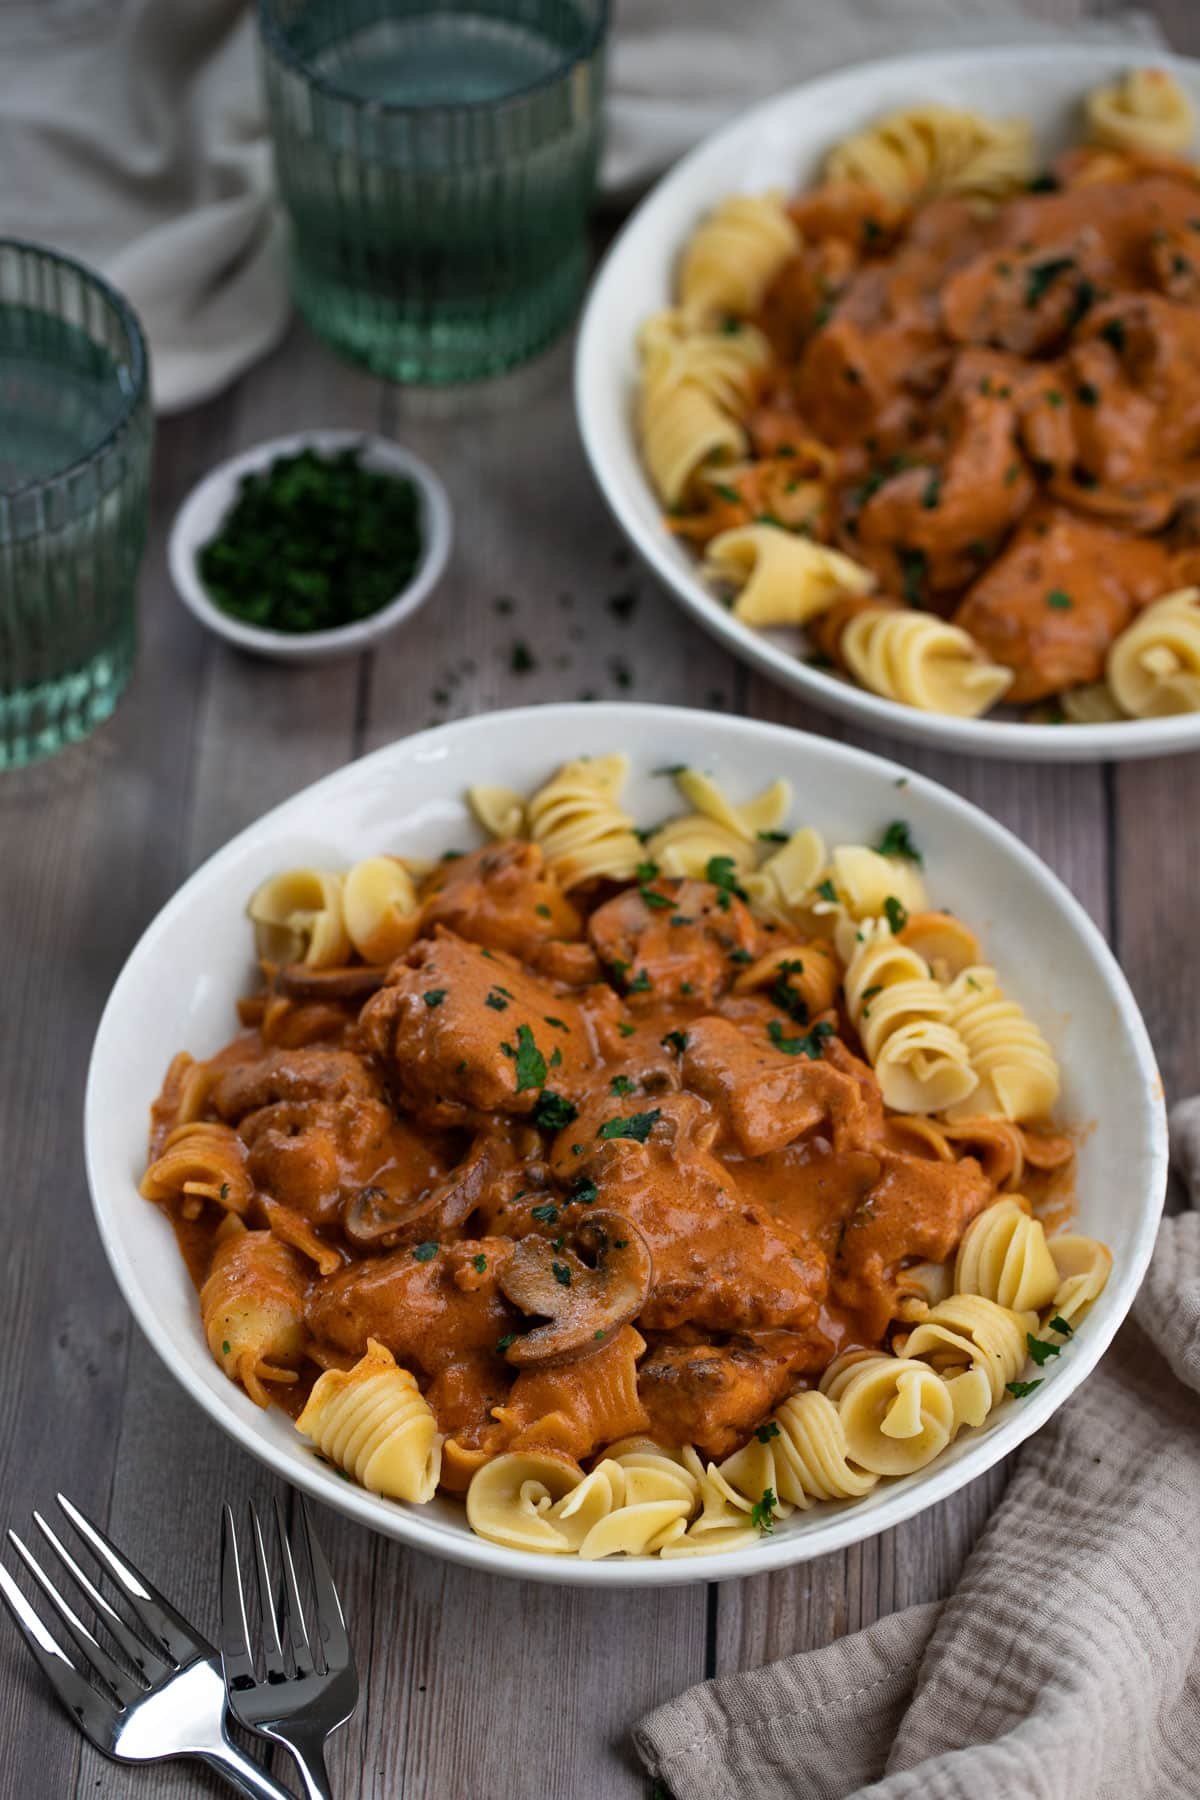 bowls of chicken stroganoff and pasta on a table.